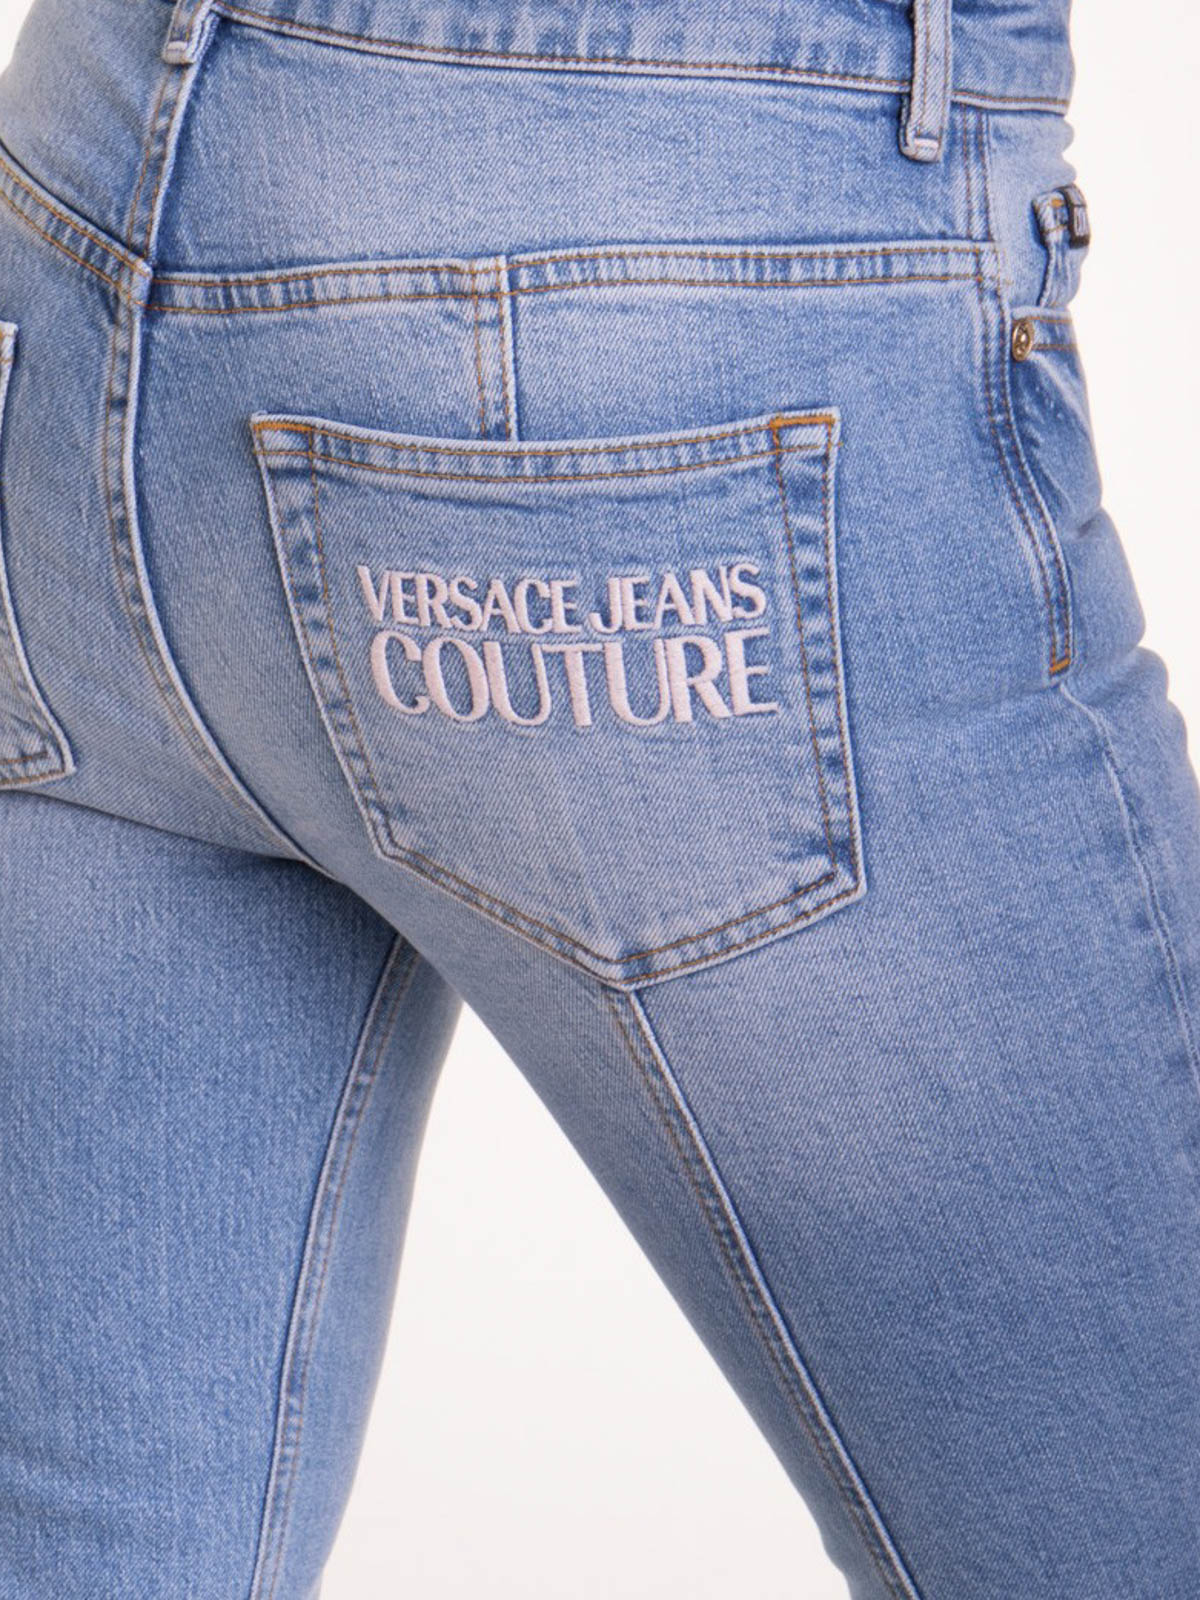 versace jeans couture real or fake